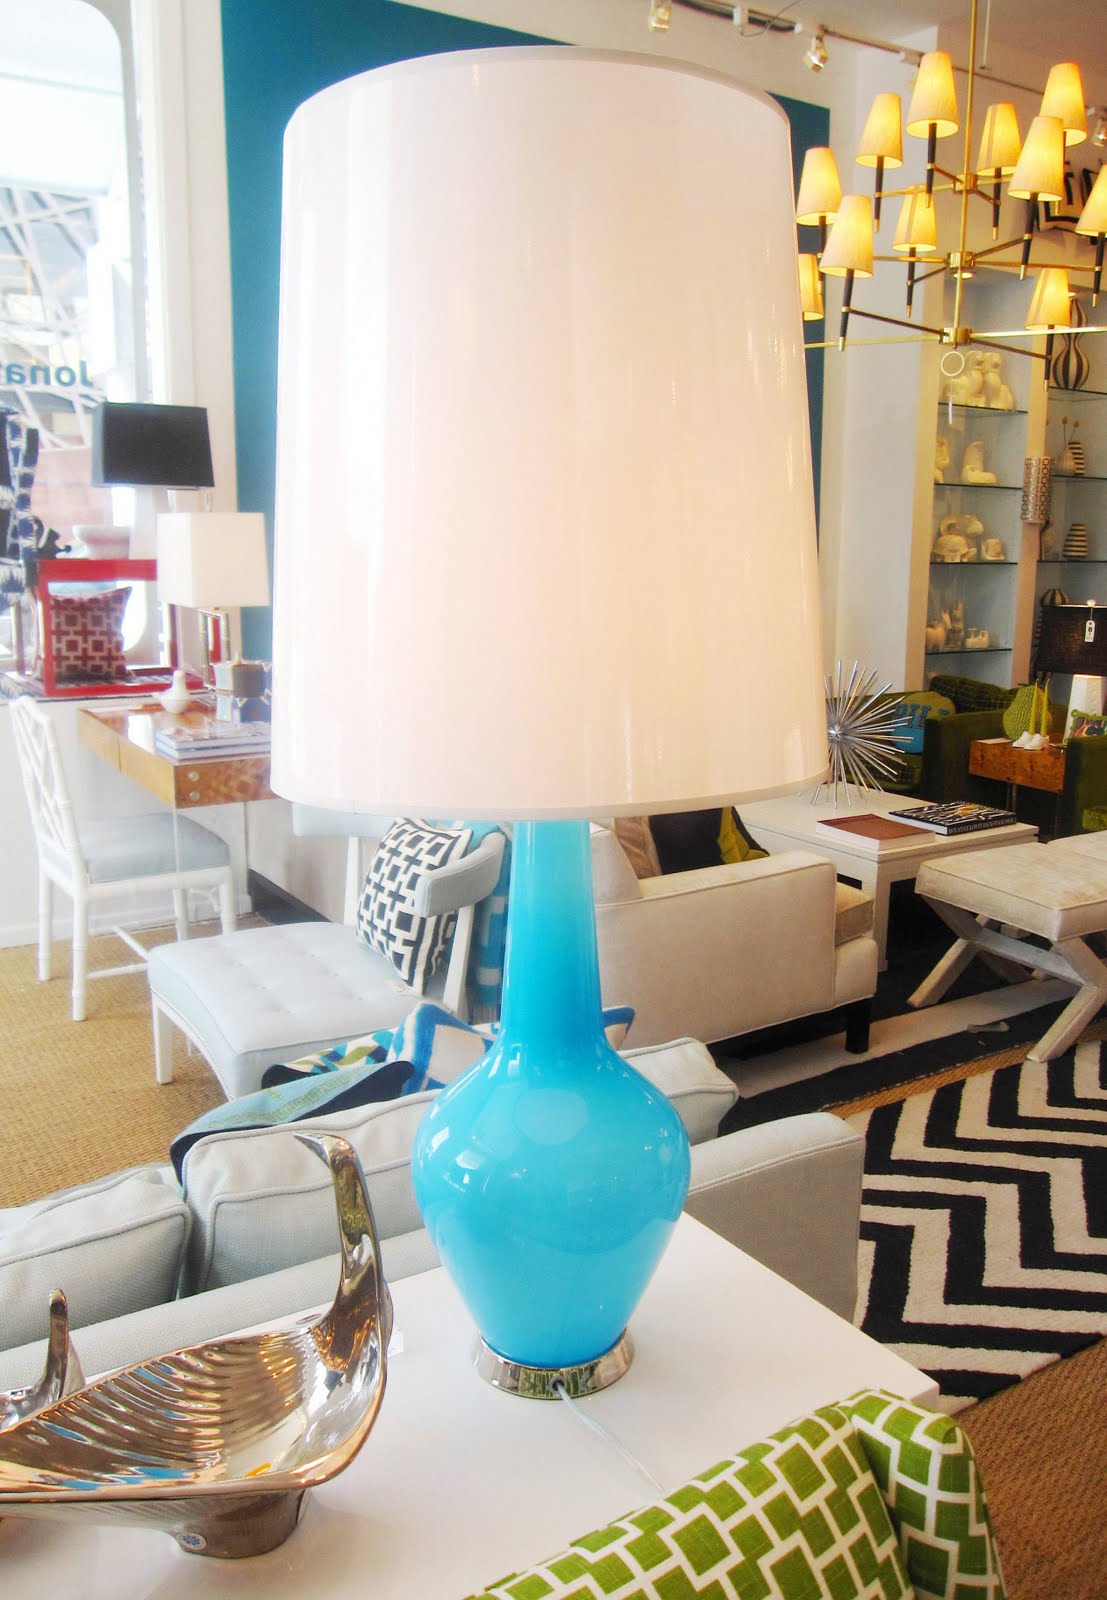 GIVEAWAY #2: LOVELY JONATHAN ADLER LAMP! COCOCOZY